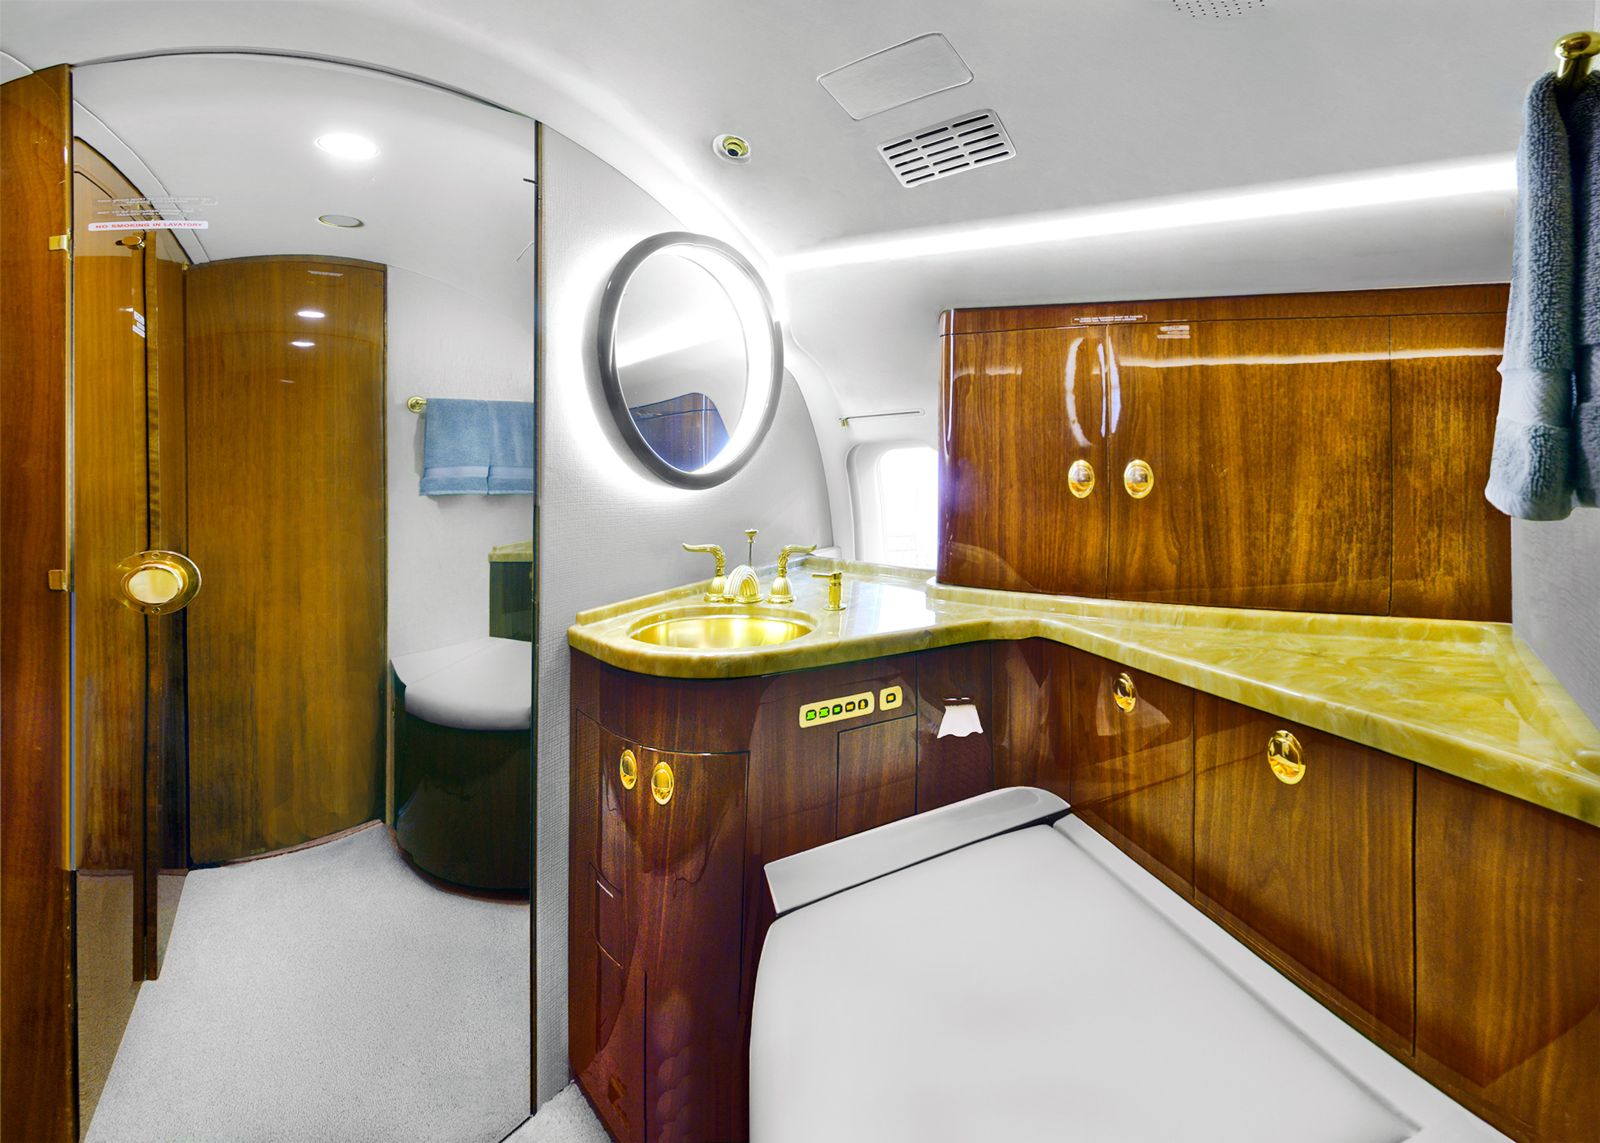 Bombardier Global Express gallery image /userfiles/images/global_express_sn9075/13aaa.jpg